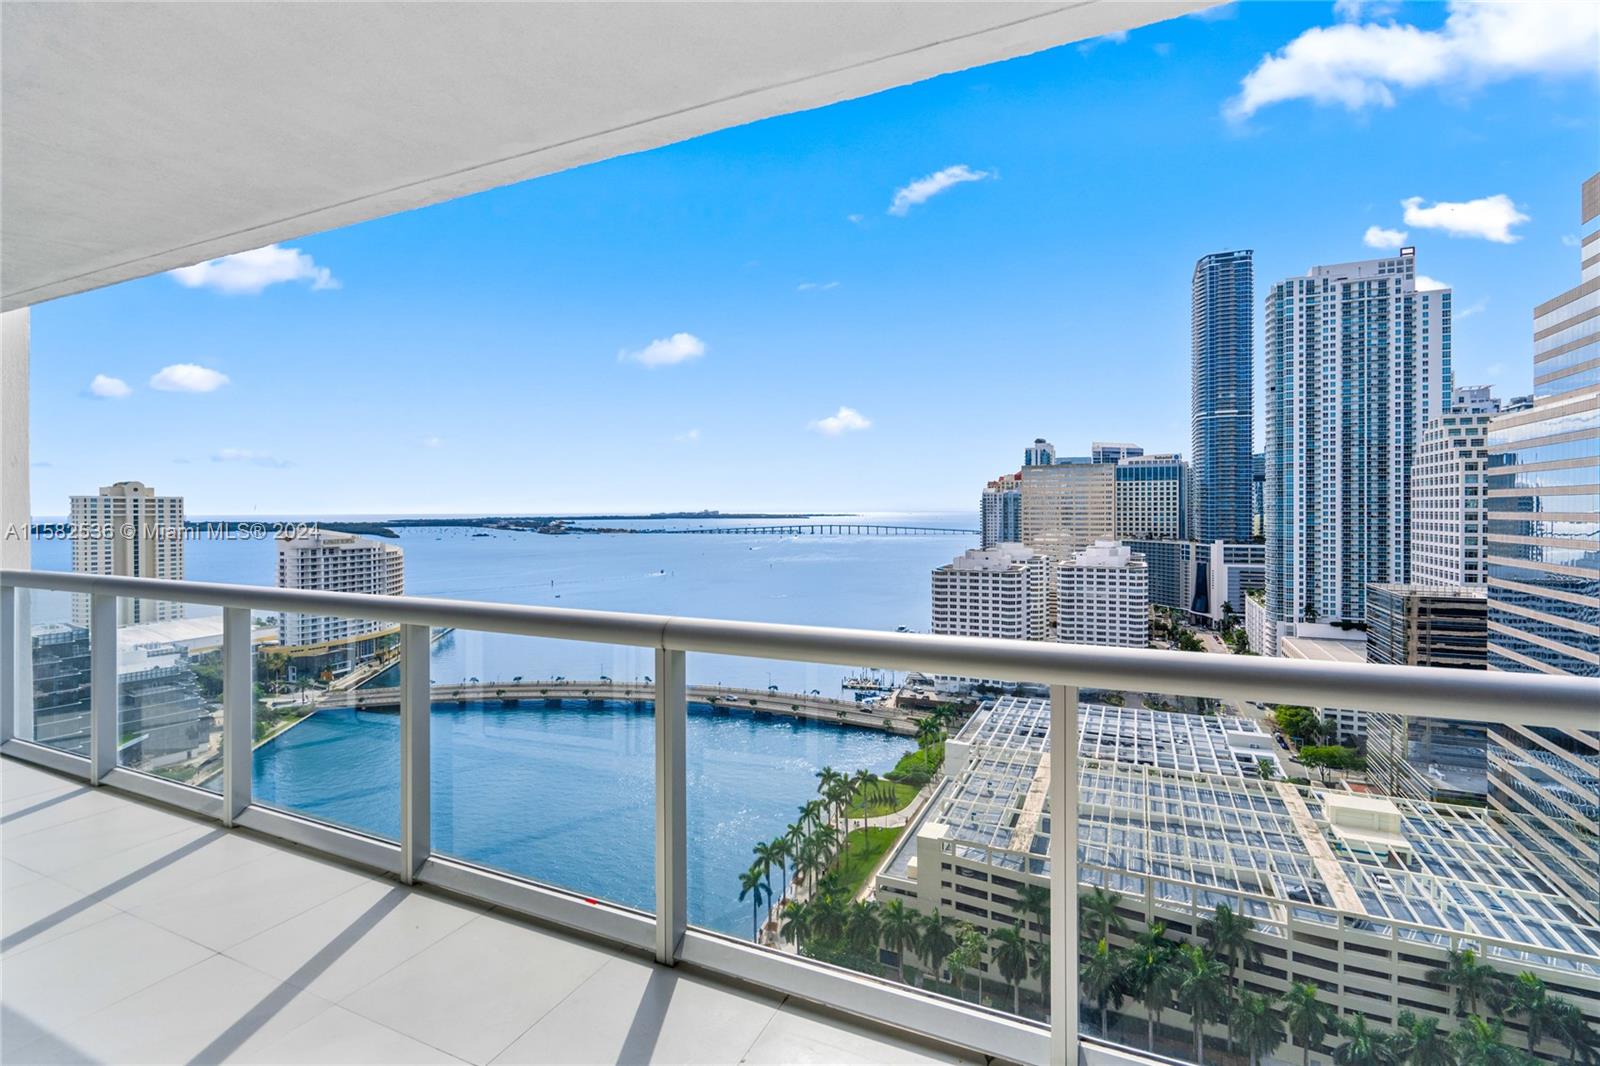 Charming Fully Furnished 2-bed, 2-bath, 1-Den luxury condo Available For Rent & Sale. Features 1,518 Sq Ft living area, 1,738 Sq Ft total as per developer floor plan, include modern luxury finishes and waterfront views. Unit offers panoramic views of the waterfront bay and Brickell skyline! ICON BRICKELL is nearby to Brickell City Centre & shops/restaurants. Fantastic dining in Icon complex with world renown Cipriani restaurant and Cantina a20. Building amenities highly popular with large spa, remodeled pool area, fitness center and much more. No Pets  -  Proof of income/funds, recent credit score, job info, and picture ID of all adults are required.  Move-in Ready.